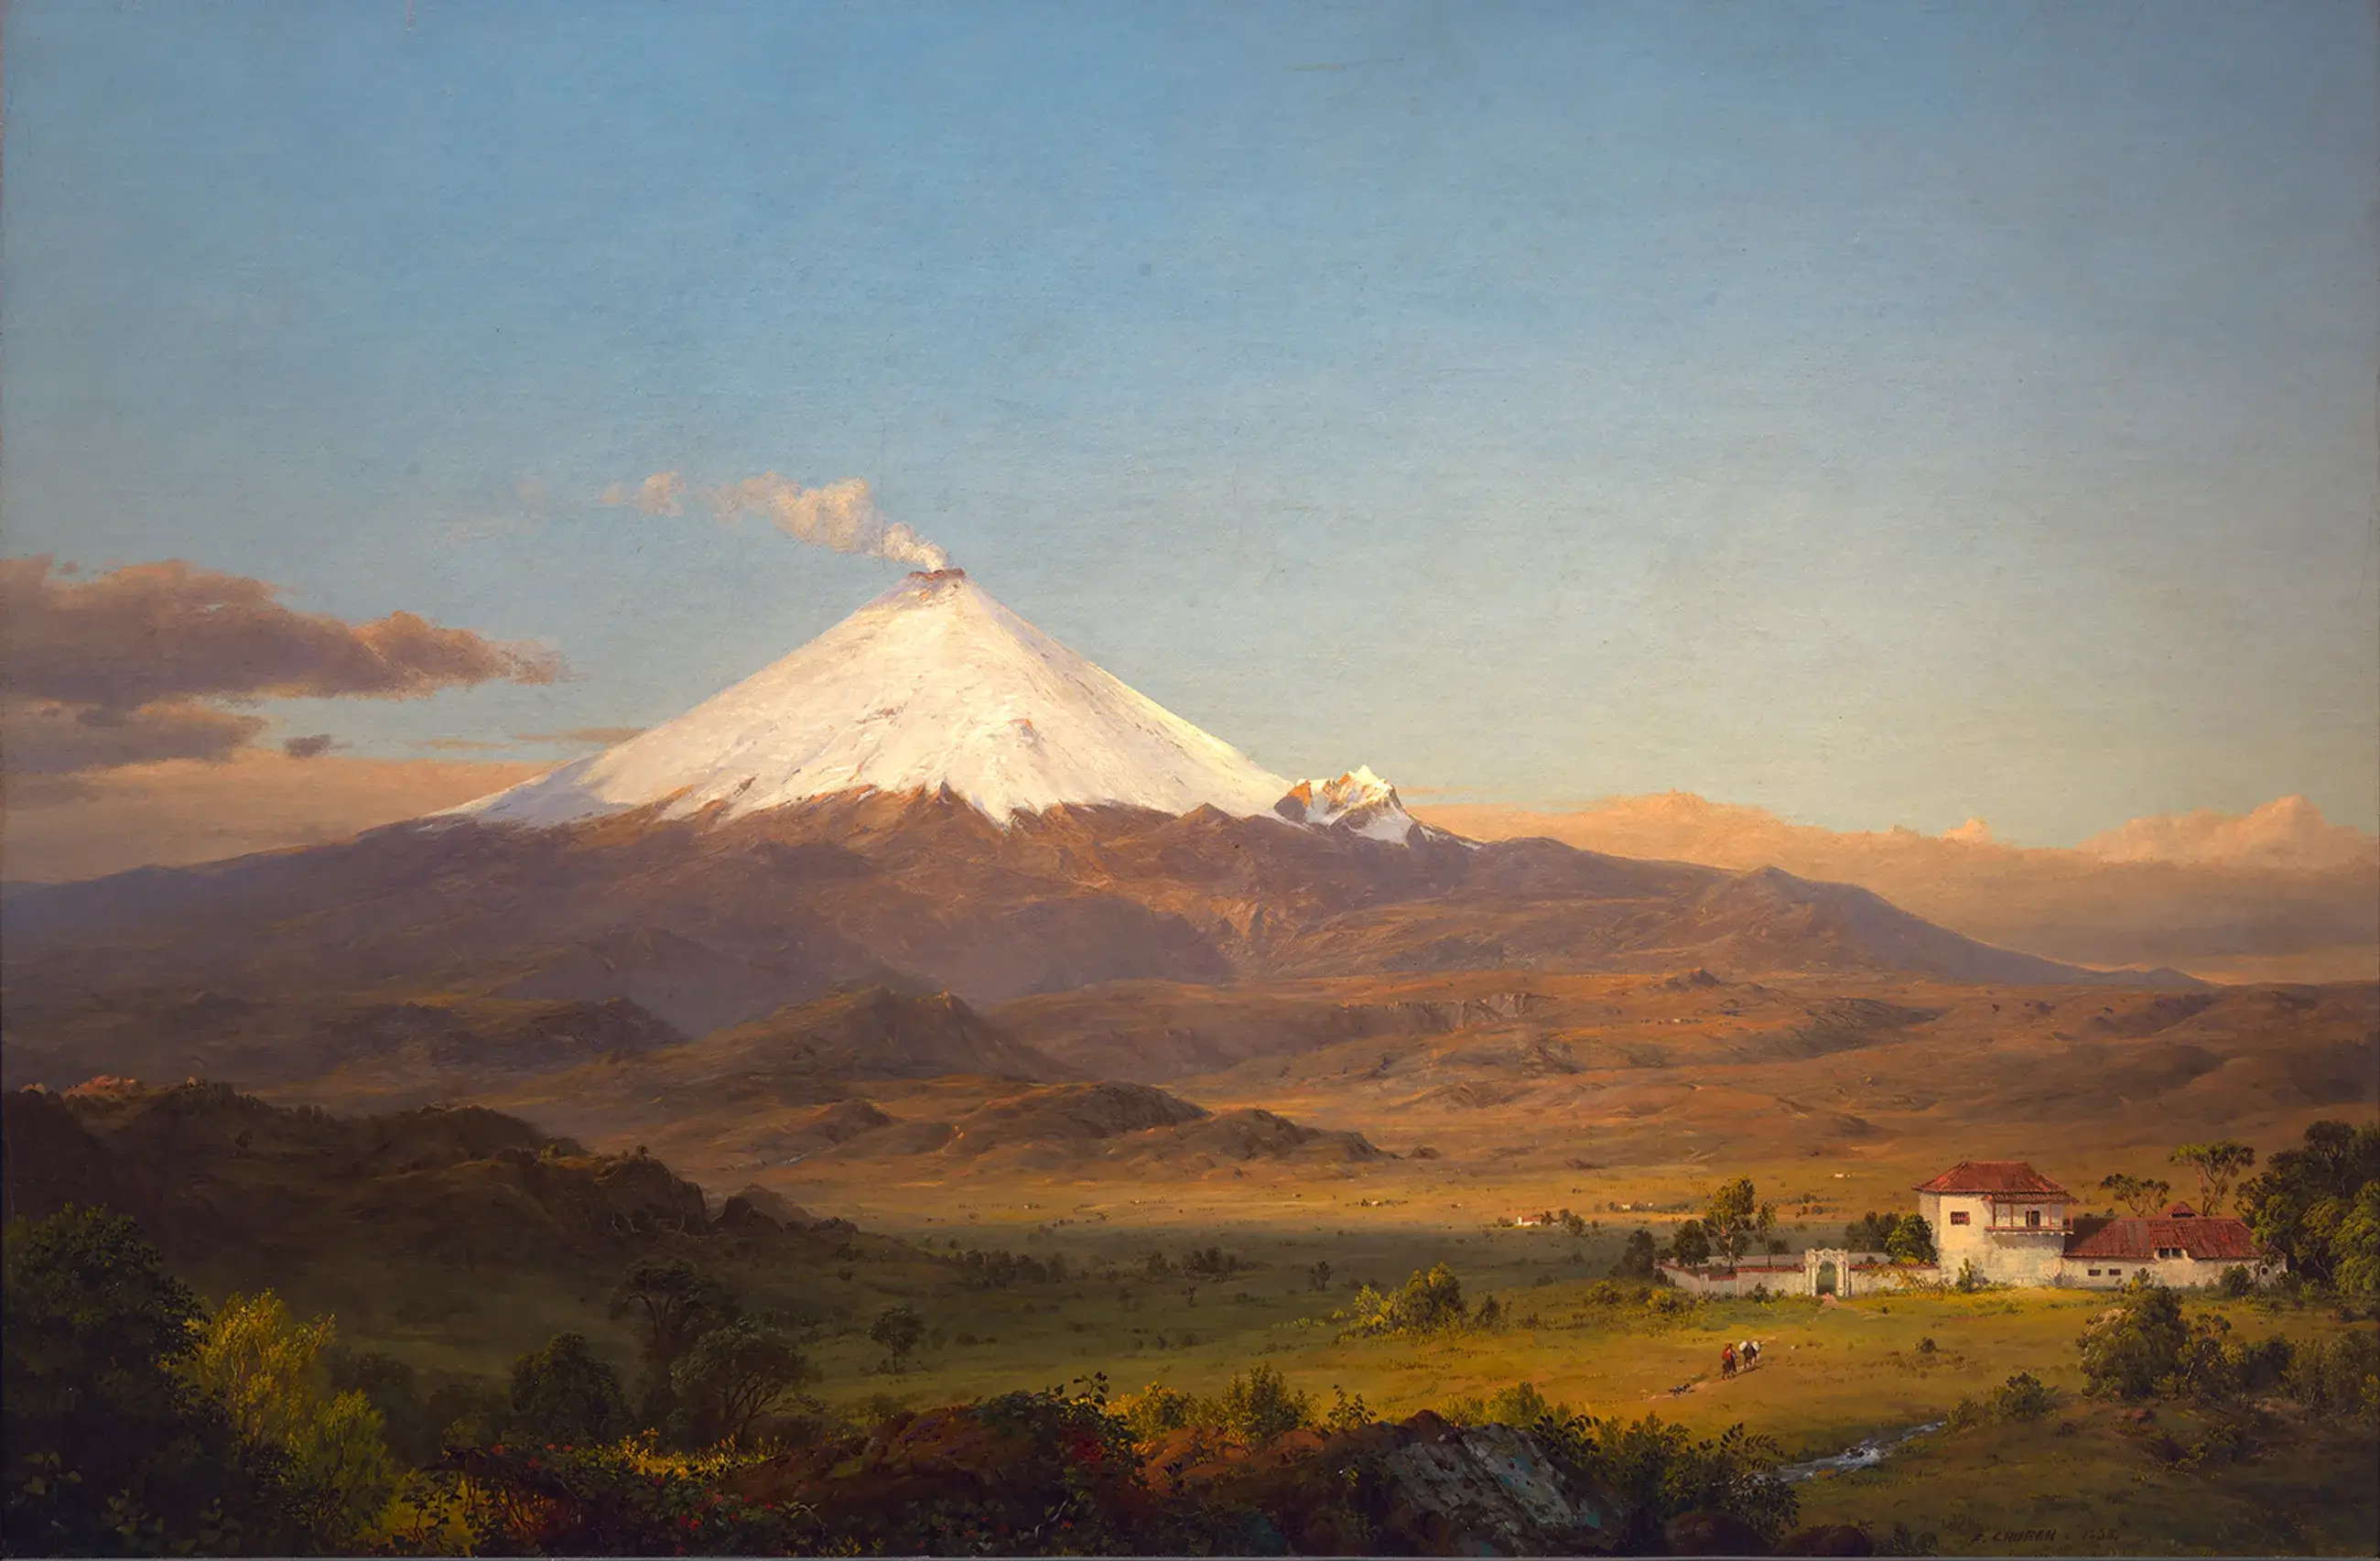 Cotopaxi Volcano with Morurco Mountain - Painting by Frederic Edwin Church, 1855